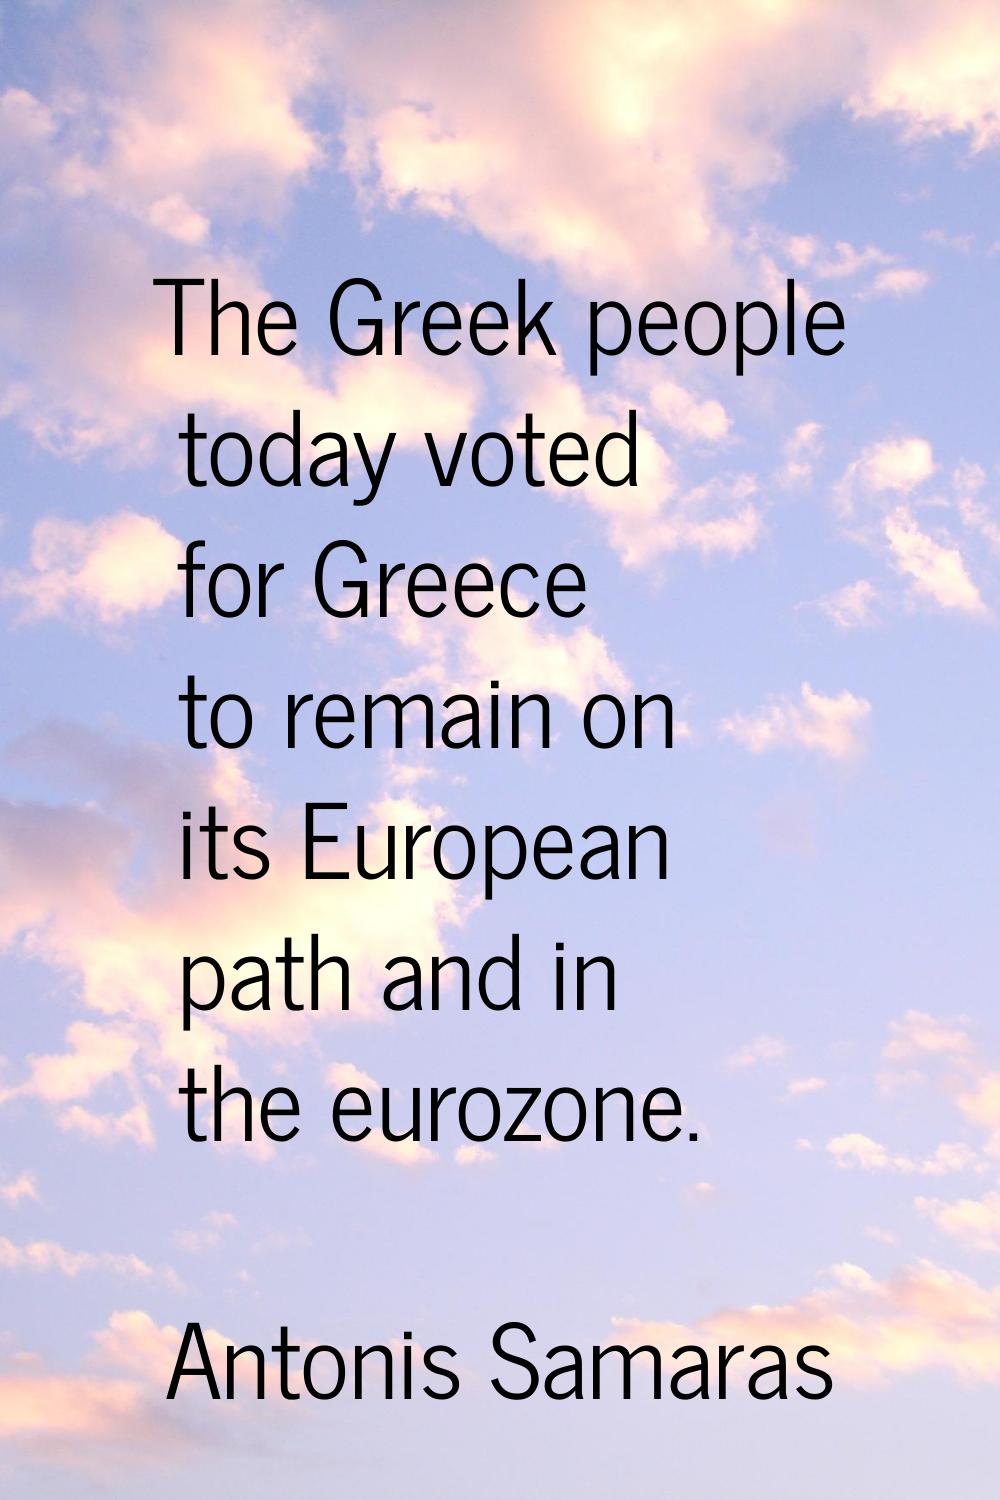 The Greek people today voted for Greece to remain on its European path and in the eurozone.